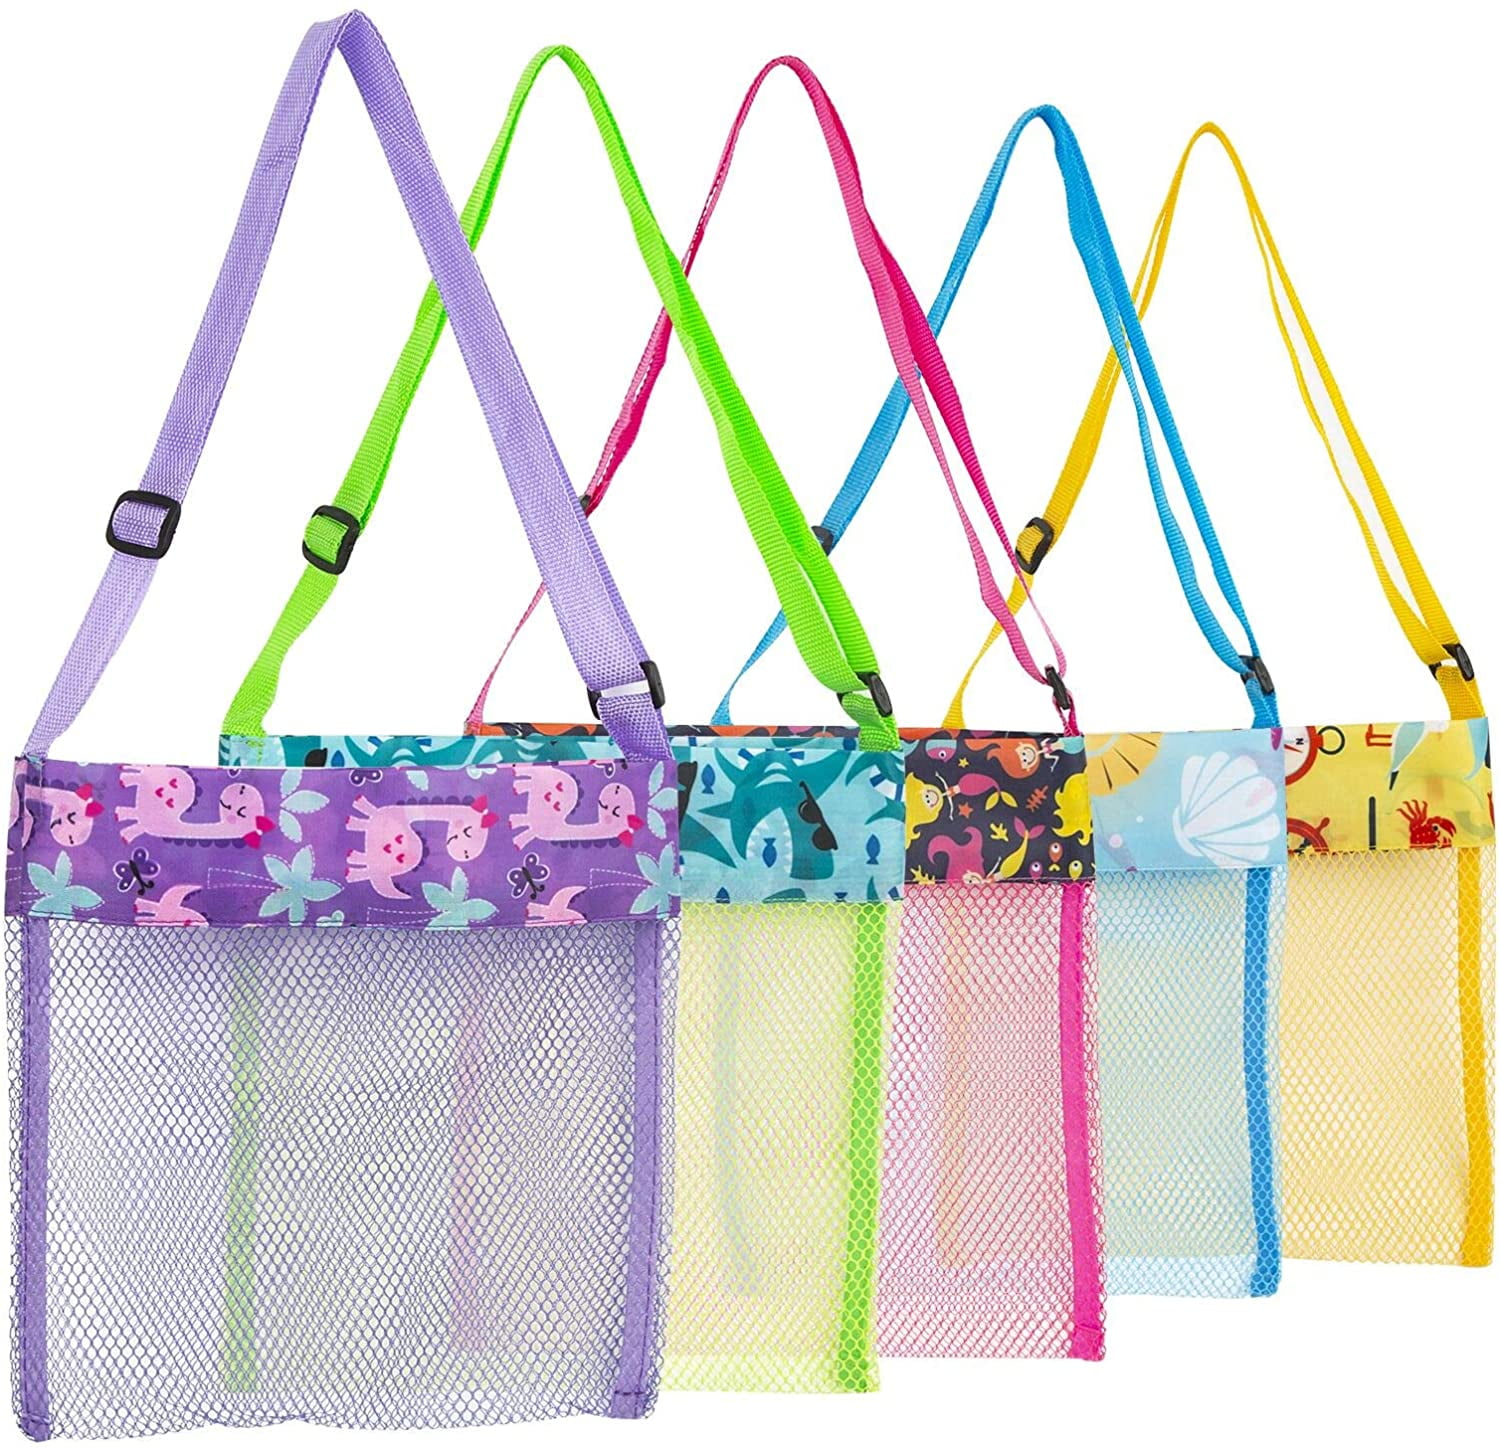 Supersellers 100pcs Small Drawstring Mesh Gift Bags Organza Bags 28x35  Pouches Packing bags Candies bags  Walmartcom